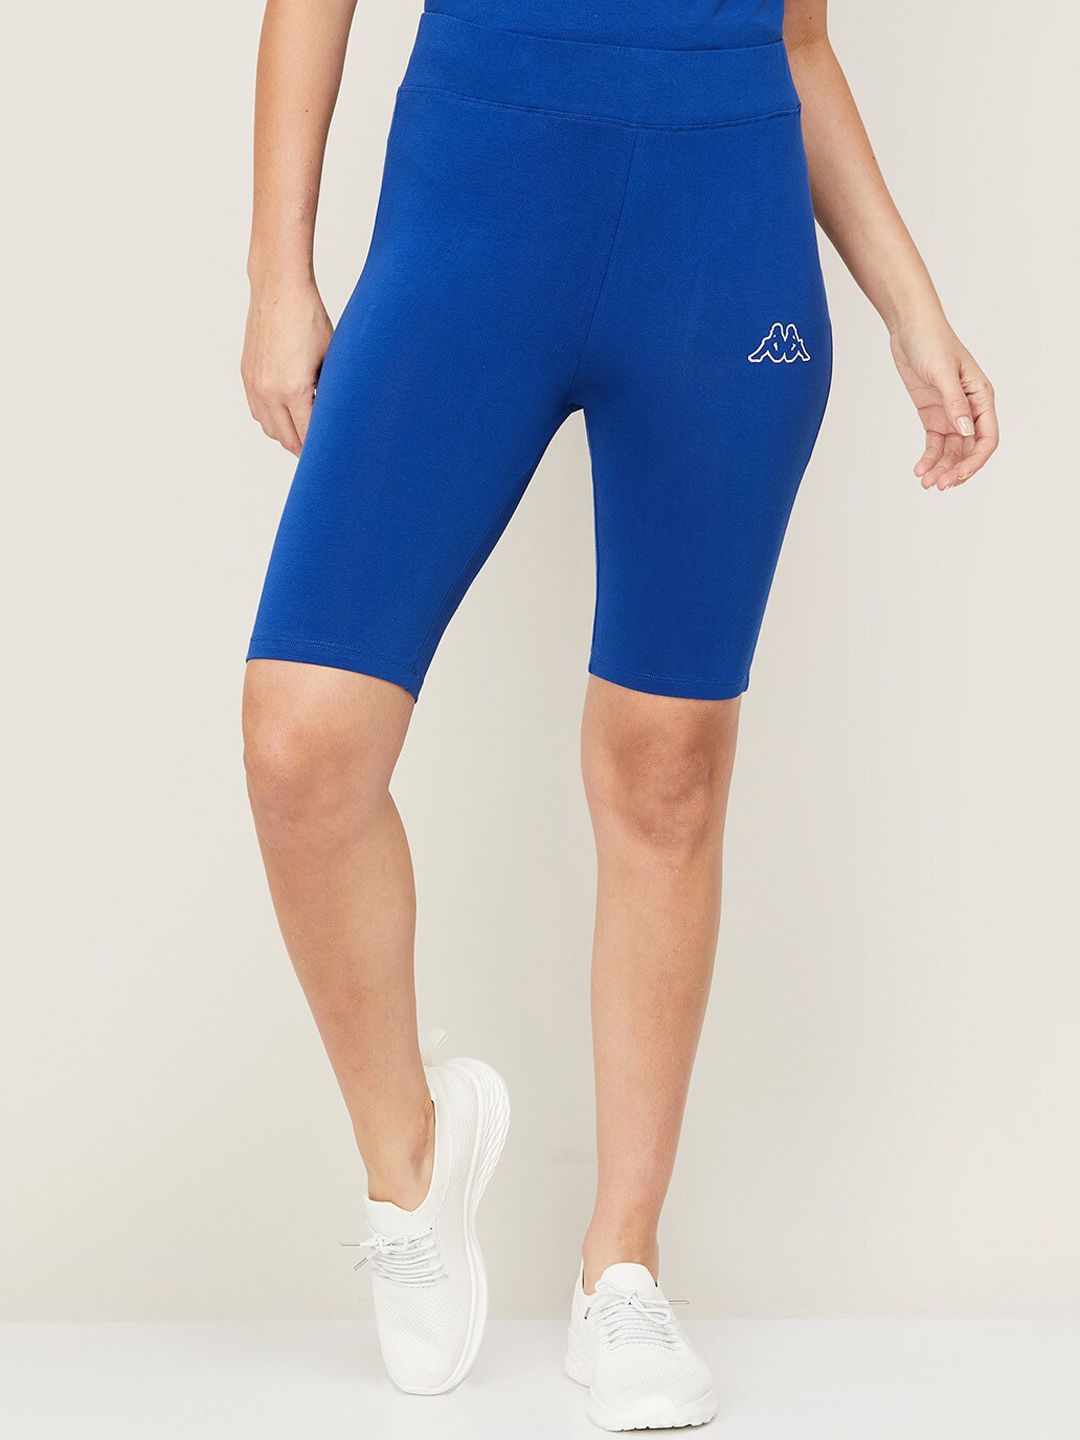 Kappa Women Blue Solid Cotton Sports Shorts Price in India